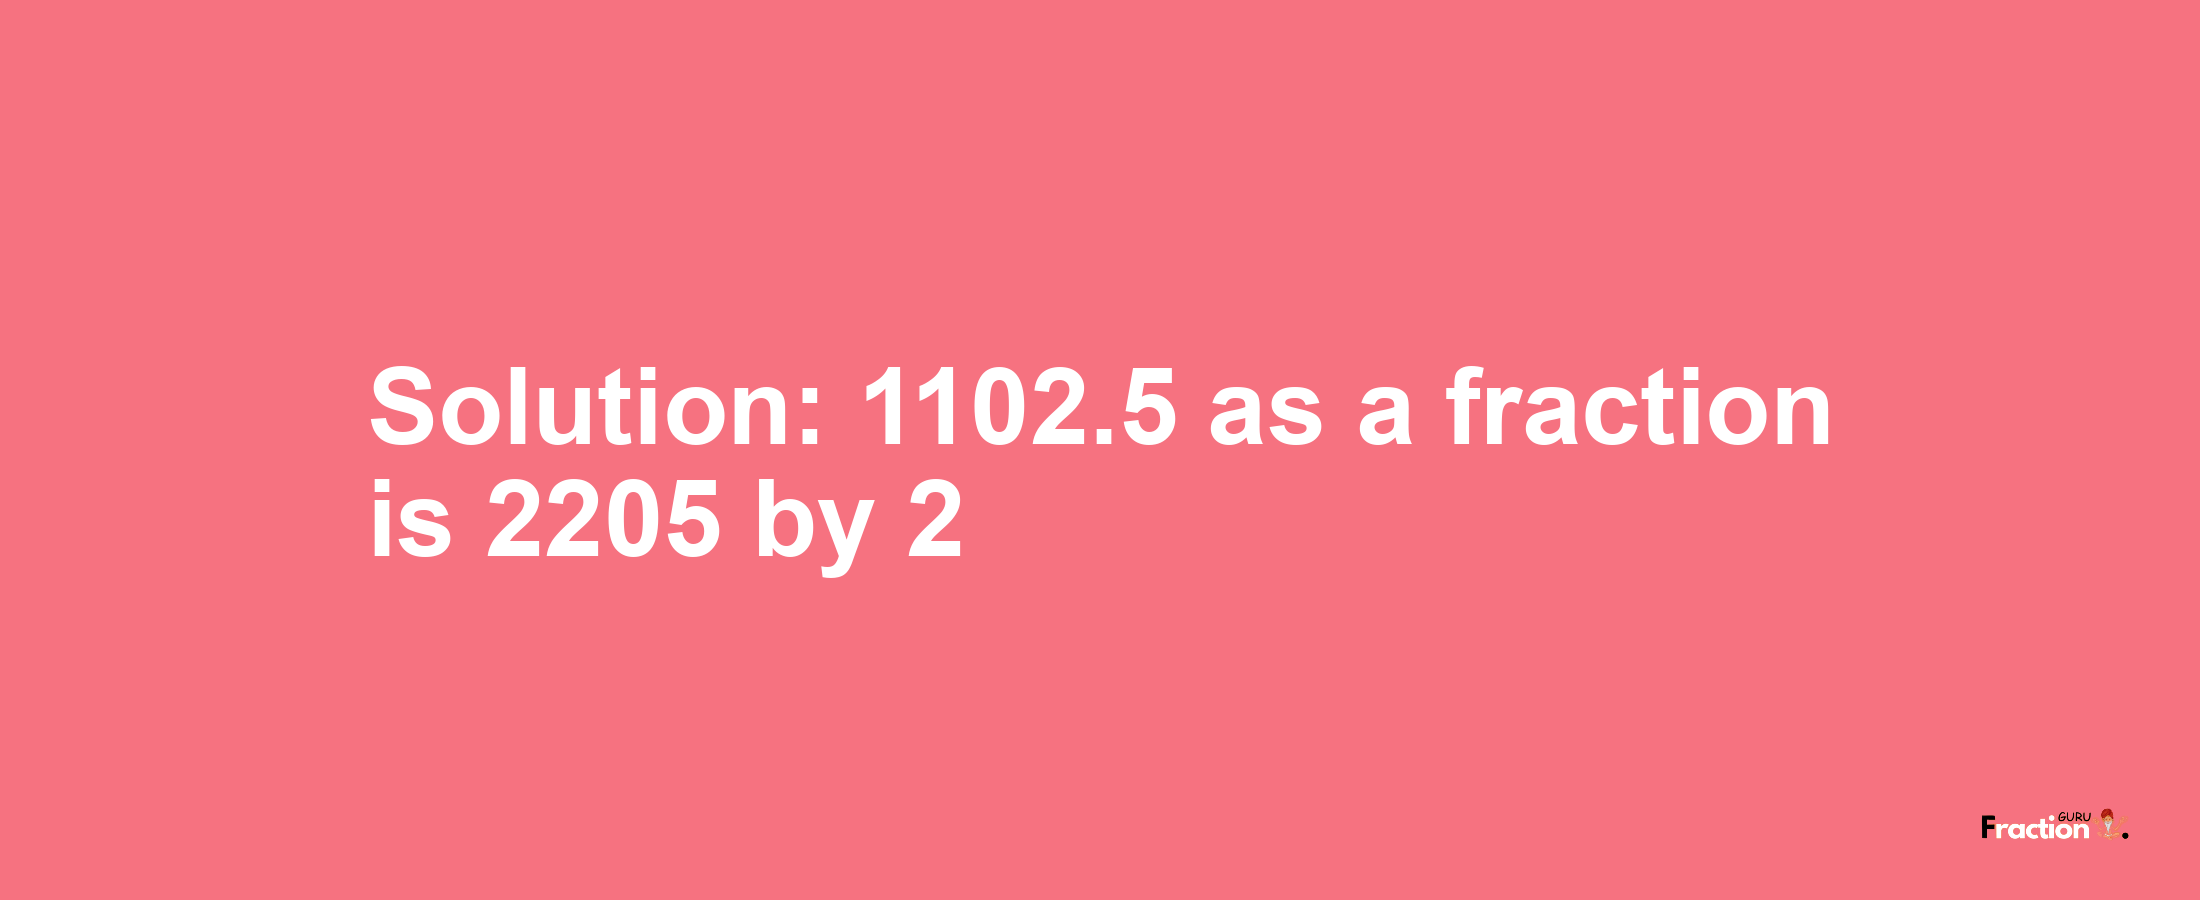 Solution:1102.5 as a fraction is 2205/2